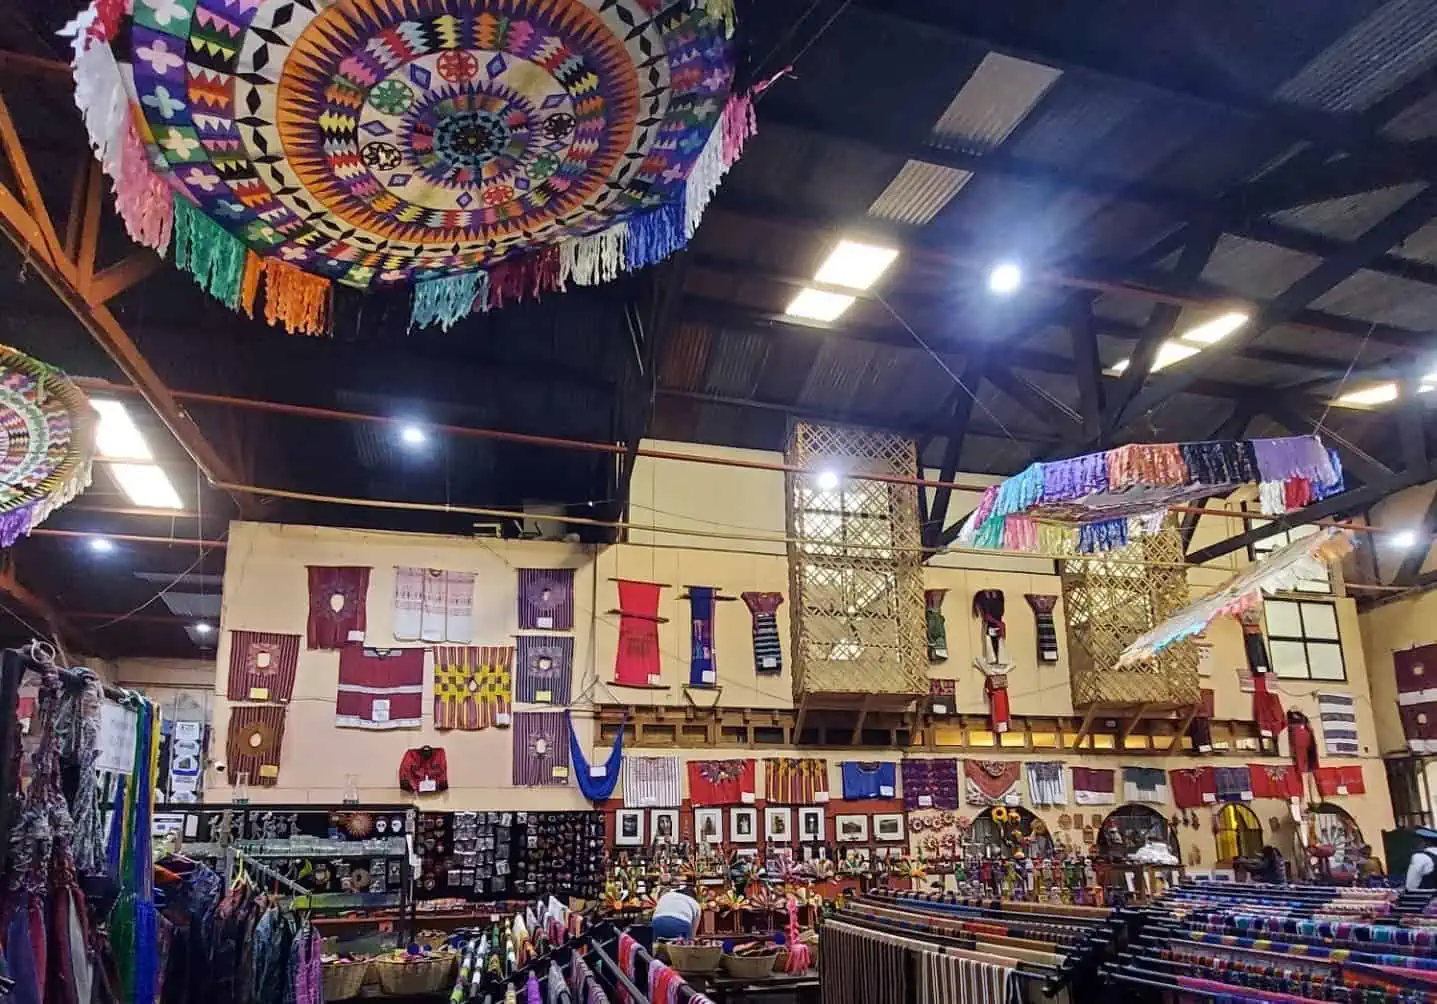 Guatemalan textile shop in Antigua with large fringed Octagonal kites in bright colors hanging from the ceiling.